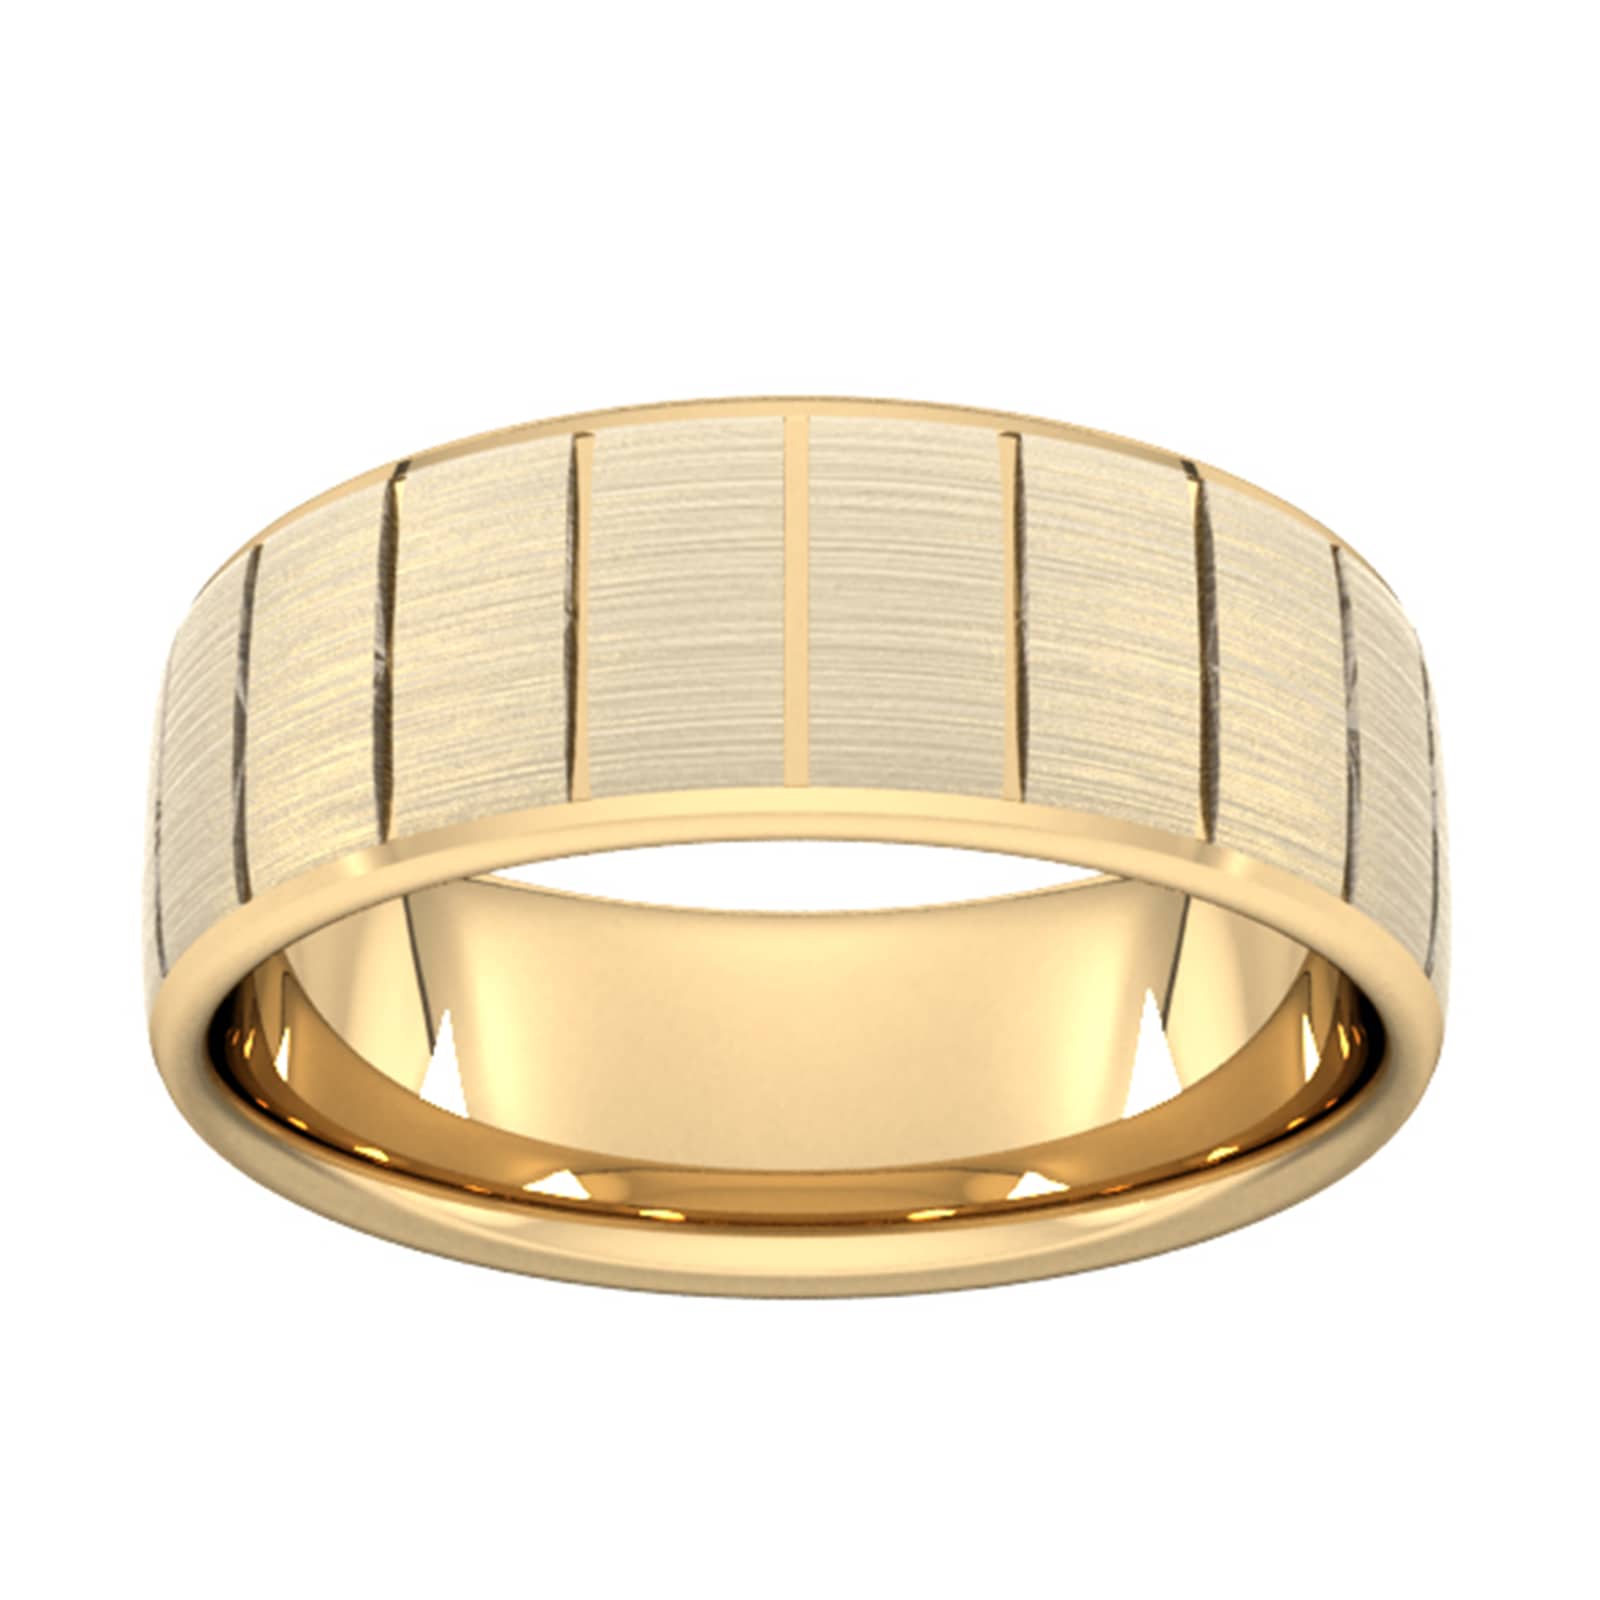 8mm Slight Court Heavy Vertical Lines Wedding Ring In 18 Carat Yellow Gold - Ring Size M